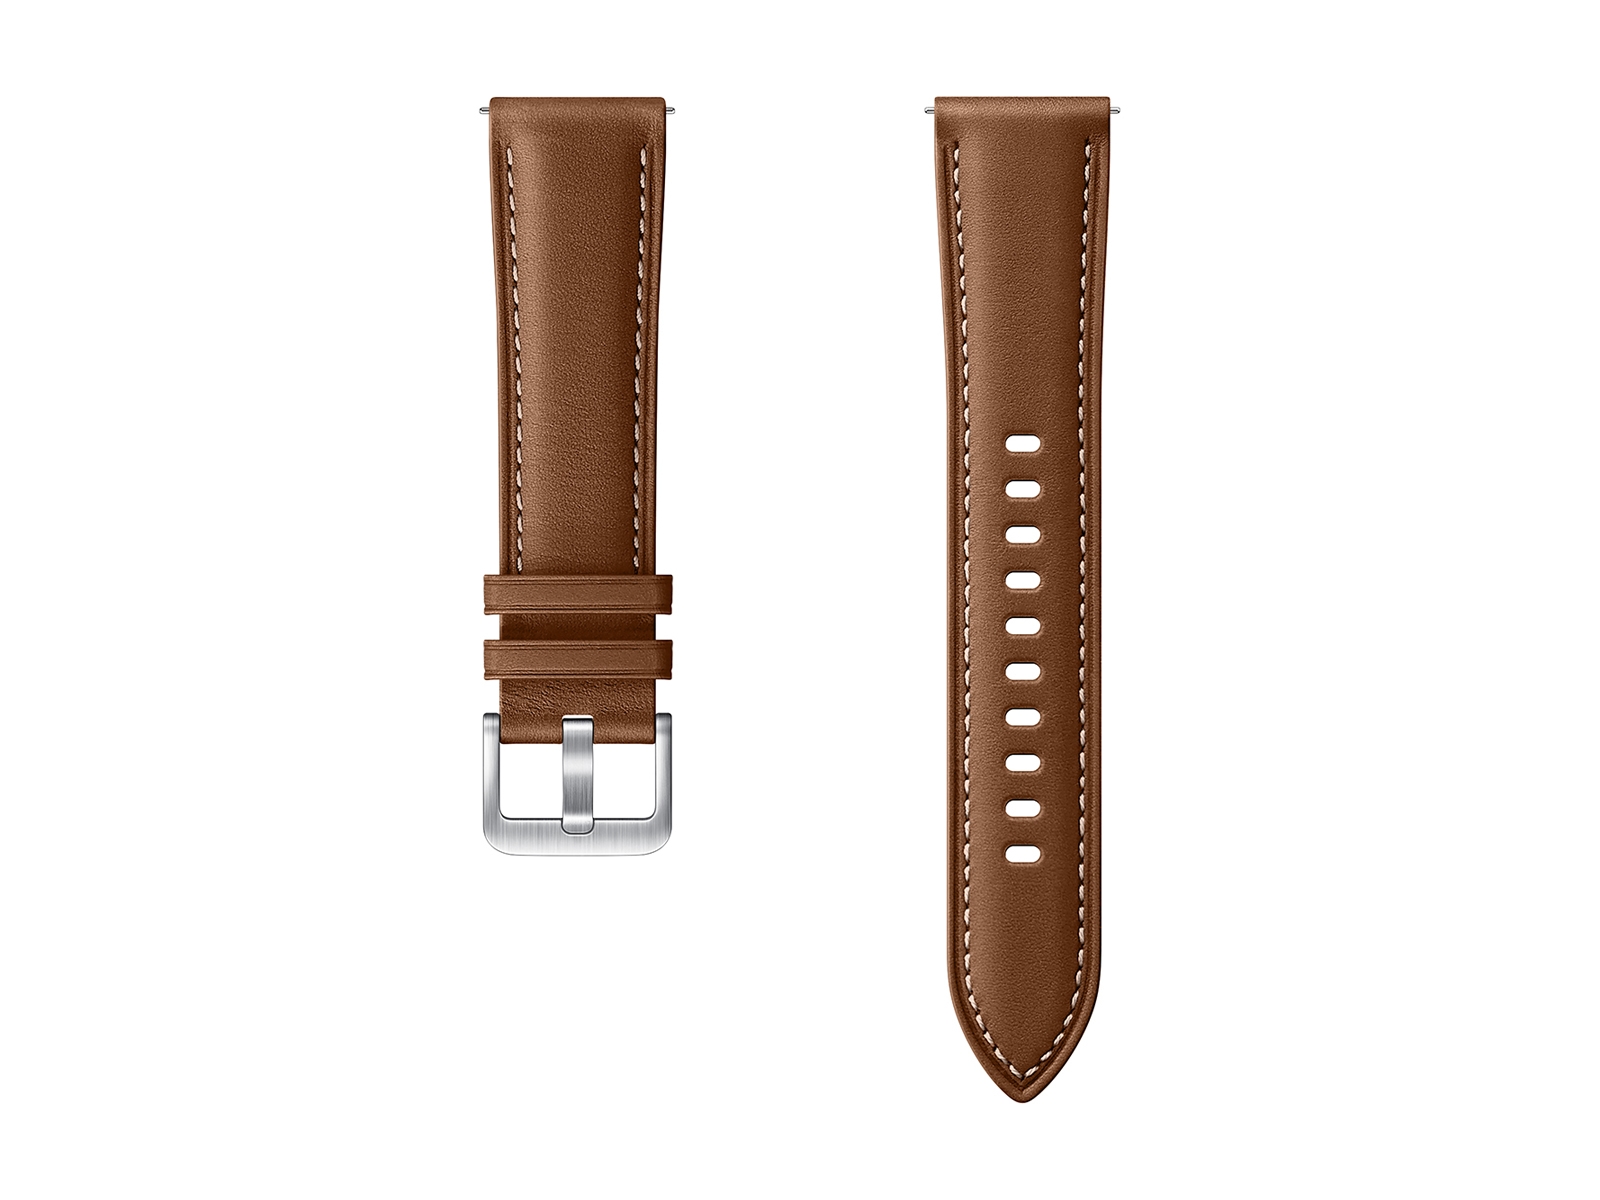  Watch Band,Genuine Leather Replacement Bands, Leat 18